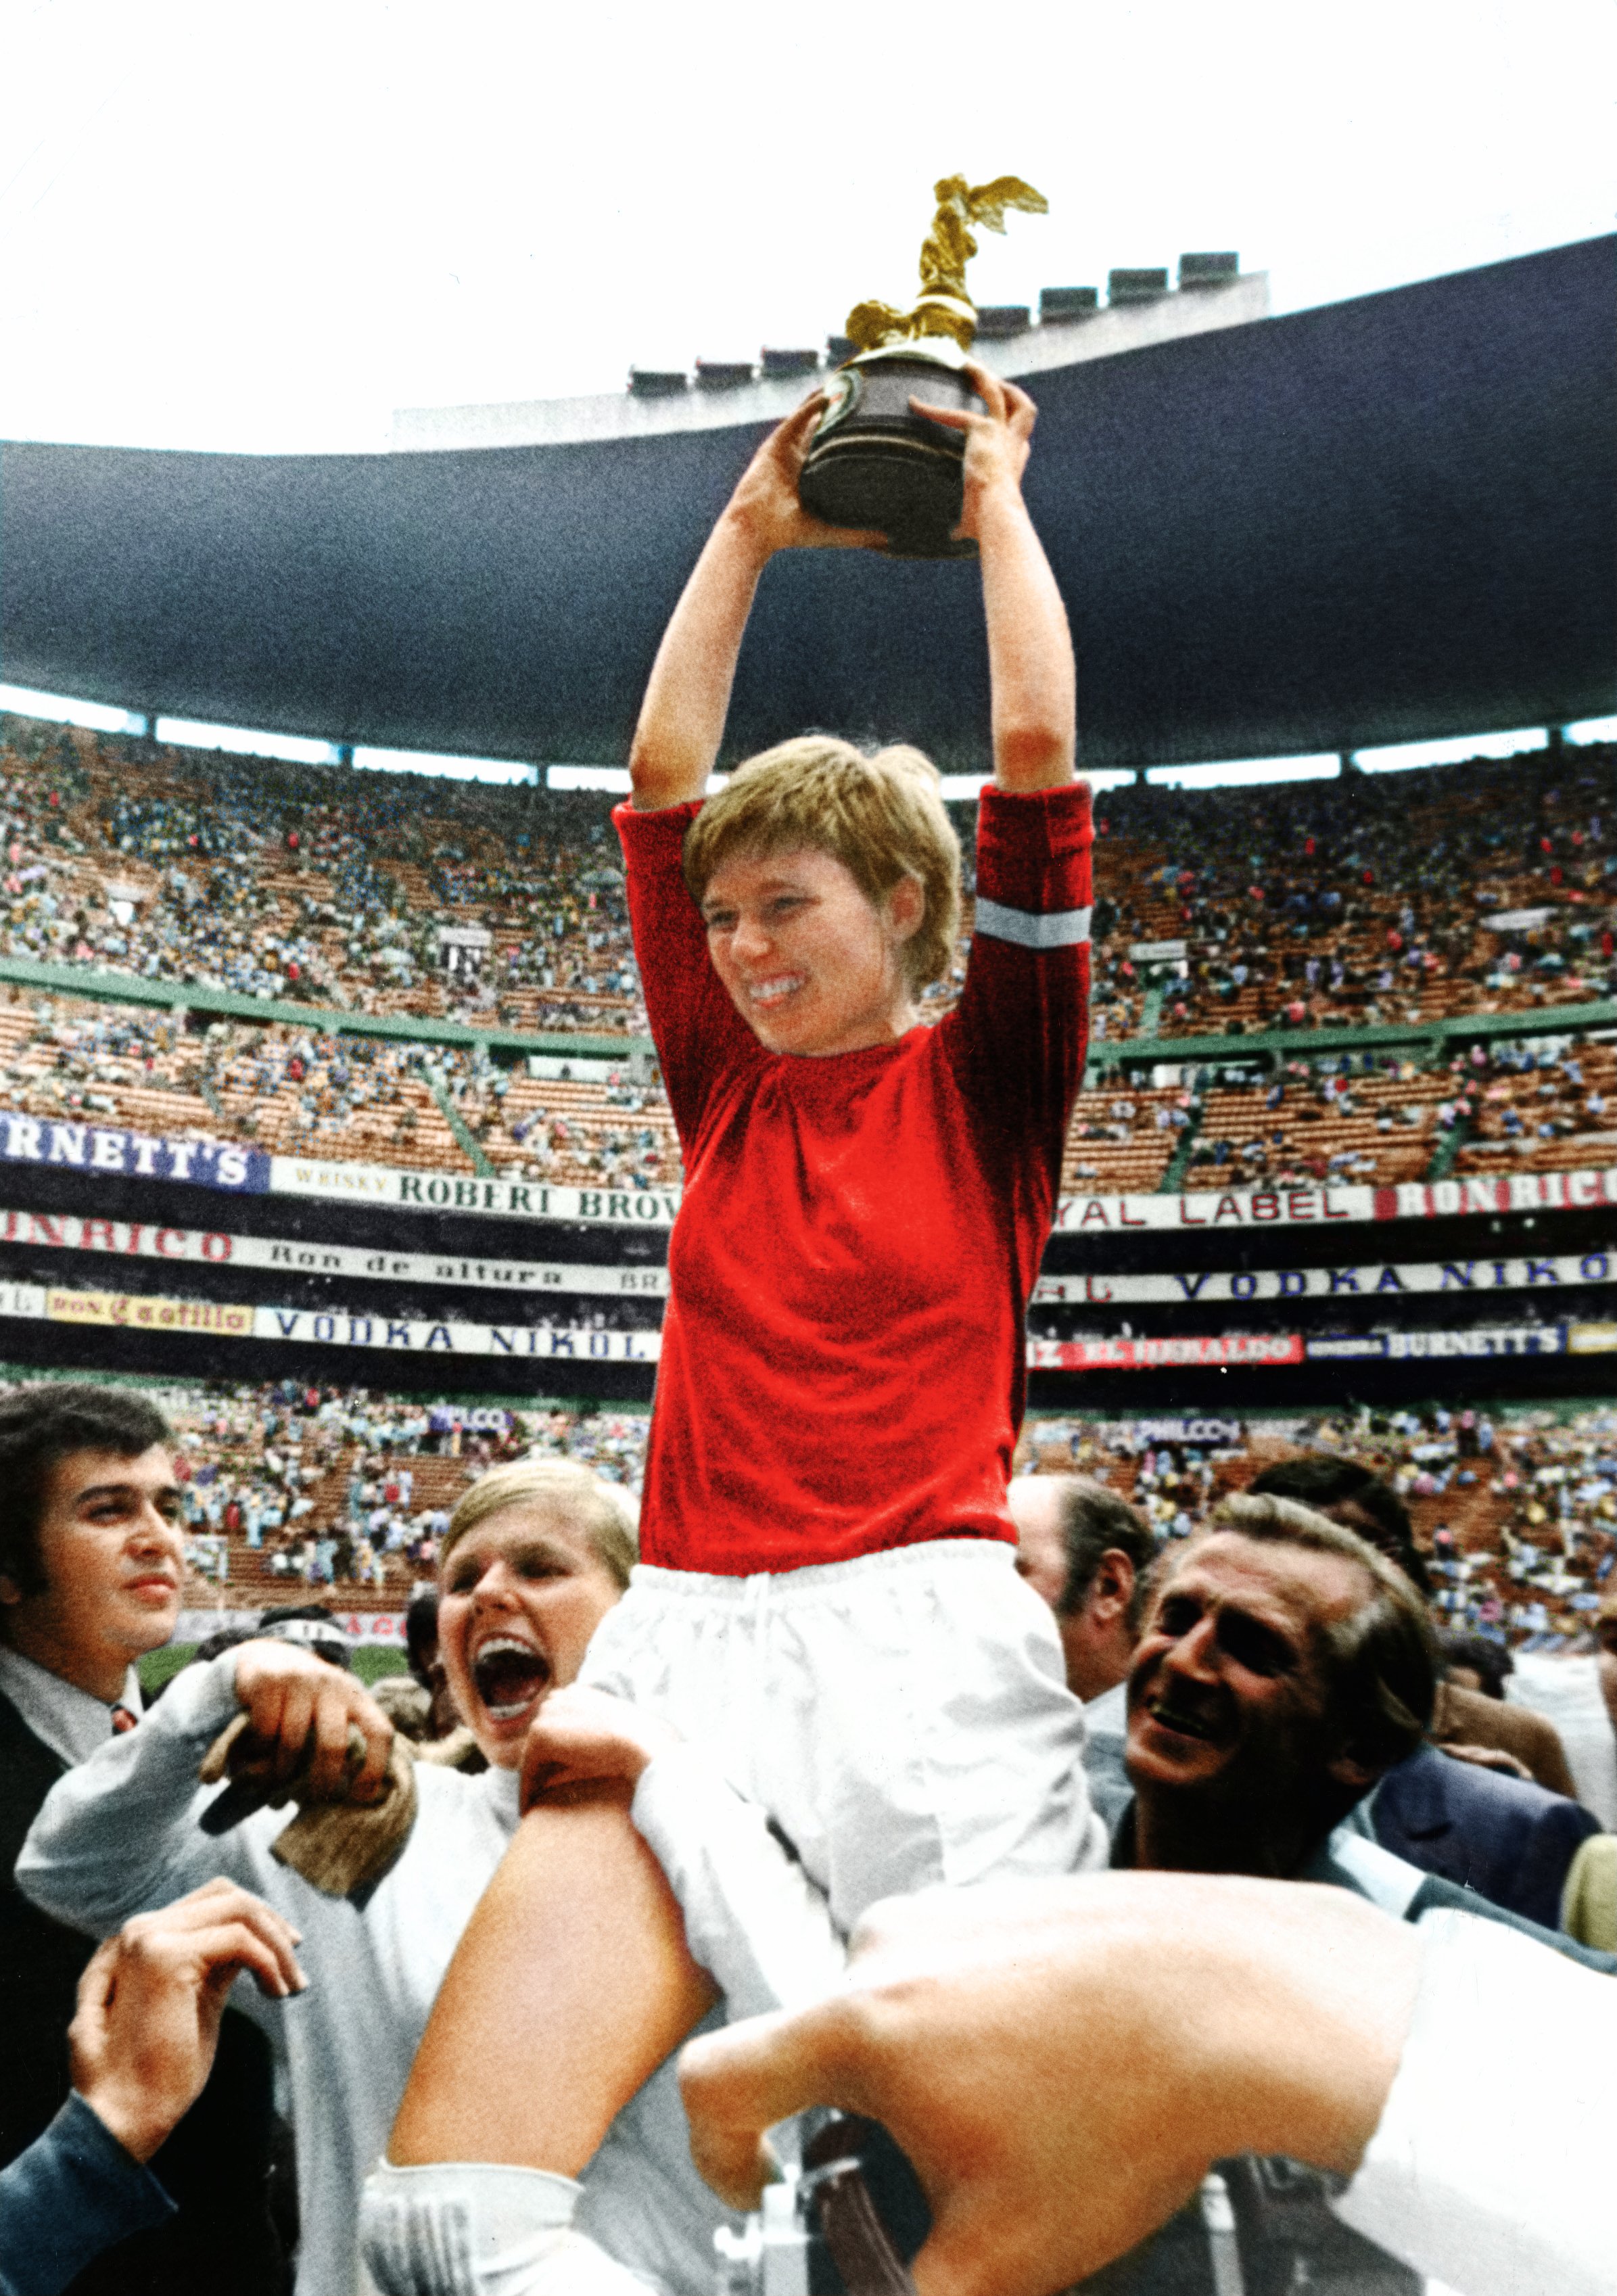 M_6781_CI_TOPFOTO_WOMENS WORLD CUP MEXICO - DENMARK PLAYER HOLDS THE TROPHY_1971_POL011950_S.NEW.01_c.jpg